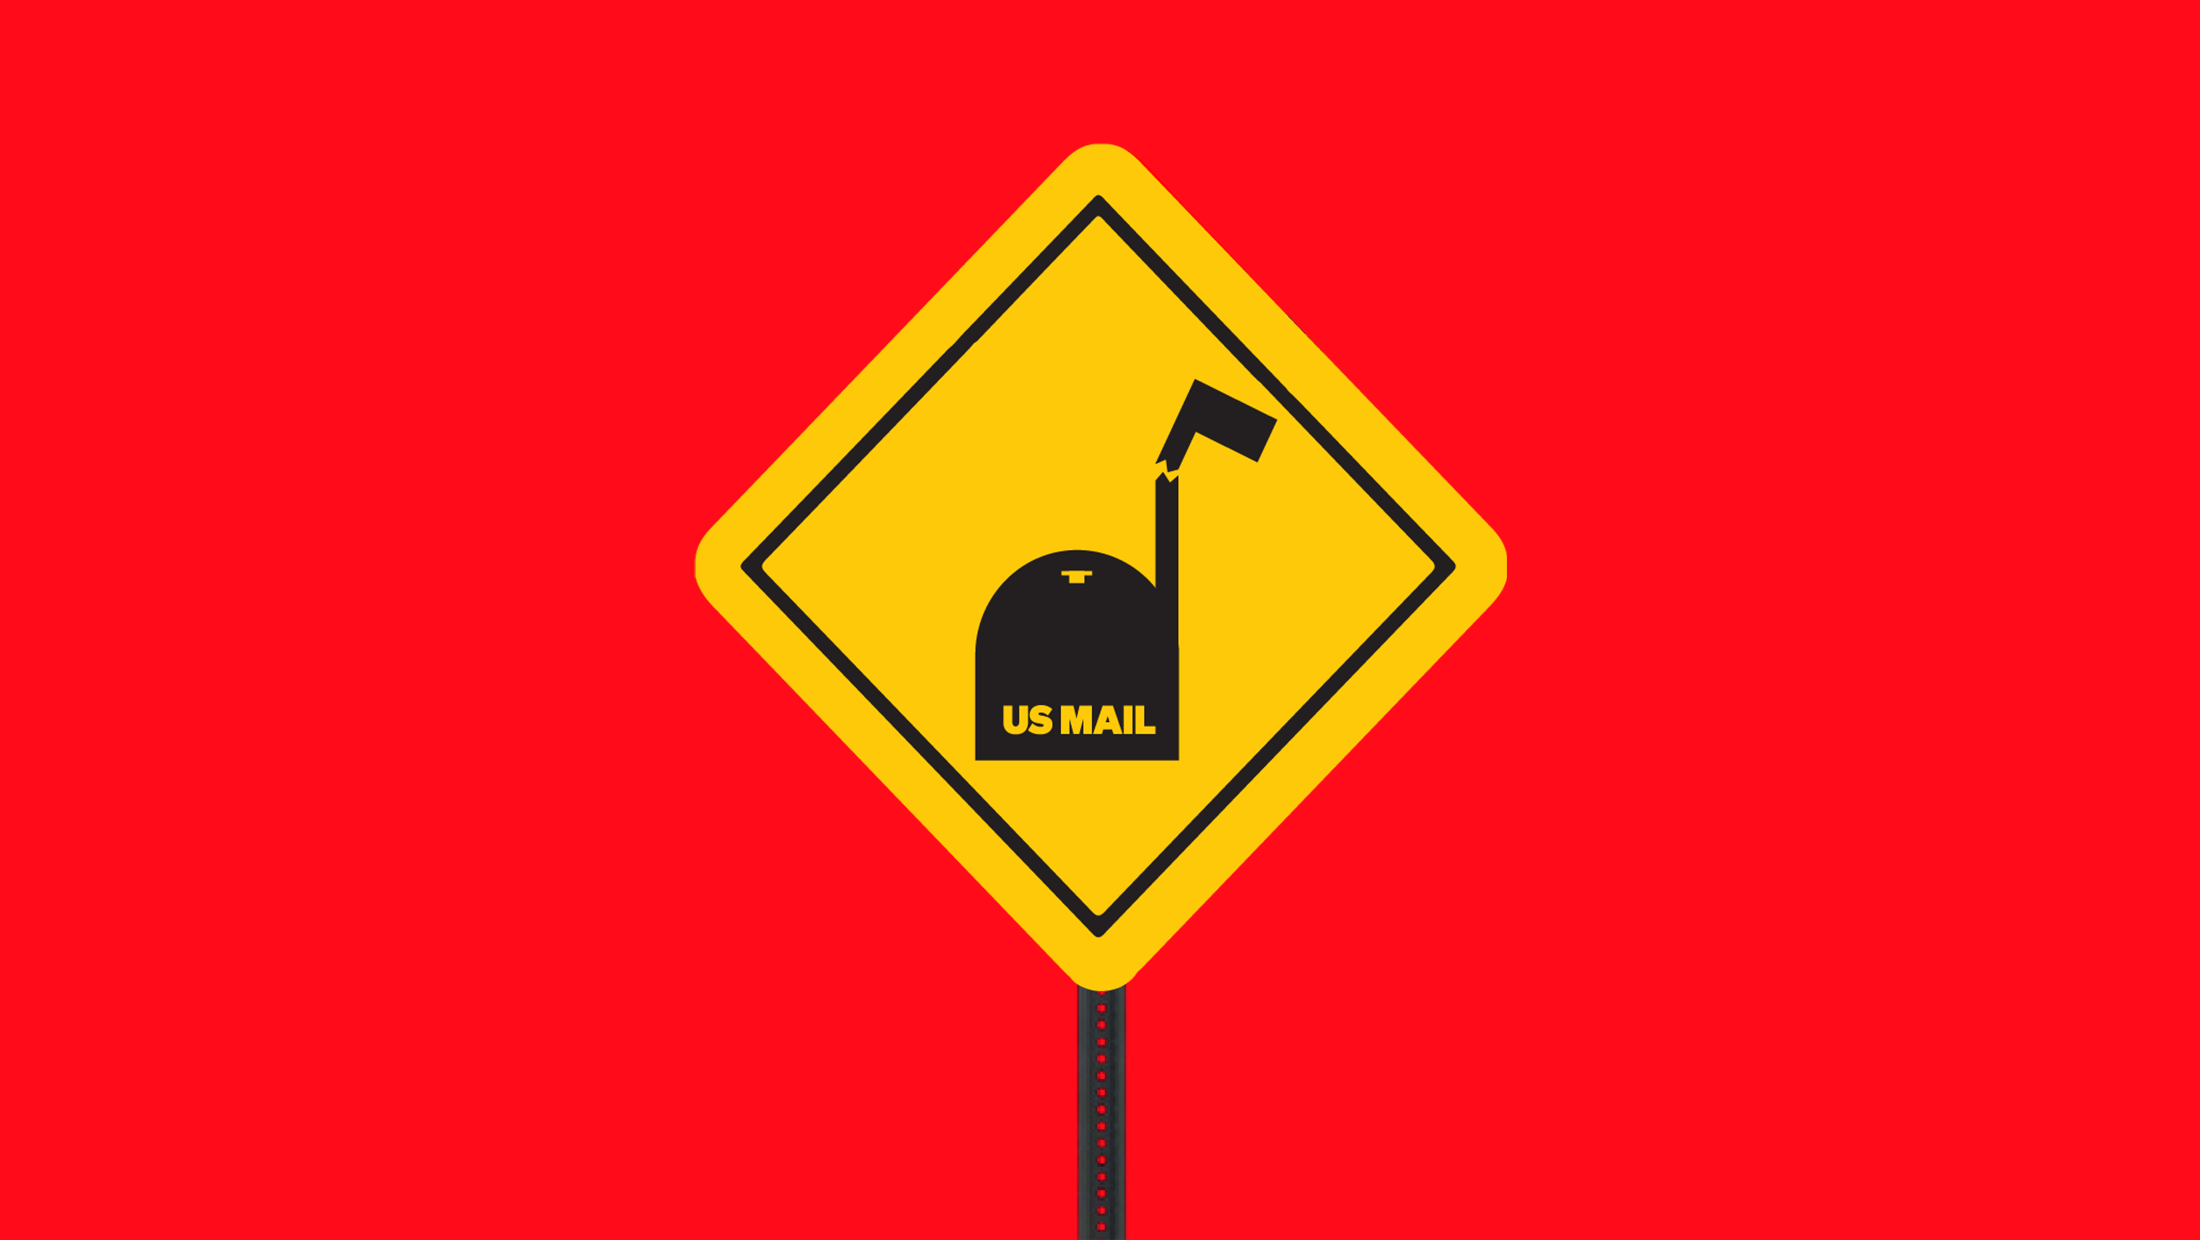 A diamond-shaped yellow construction sign that features a cracked U.S. mail box as a warning